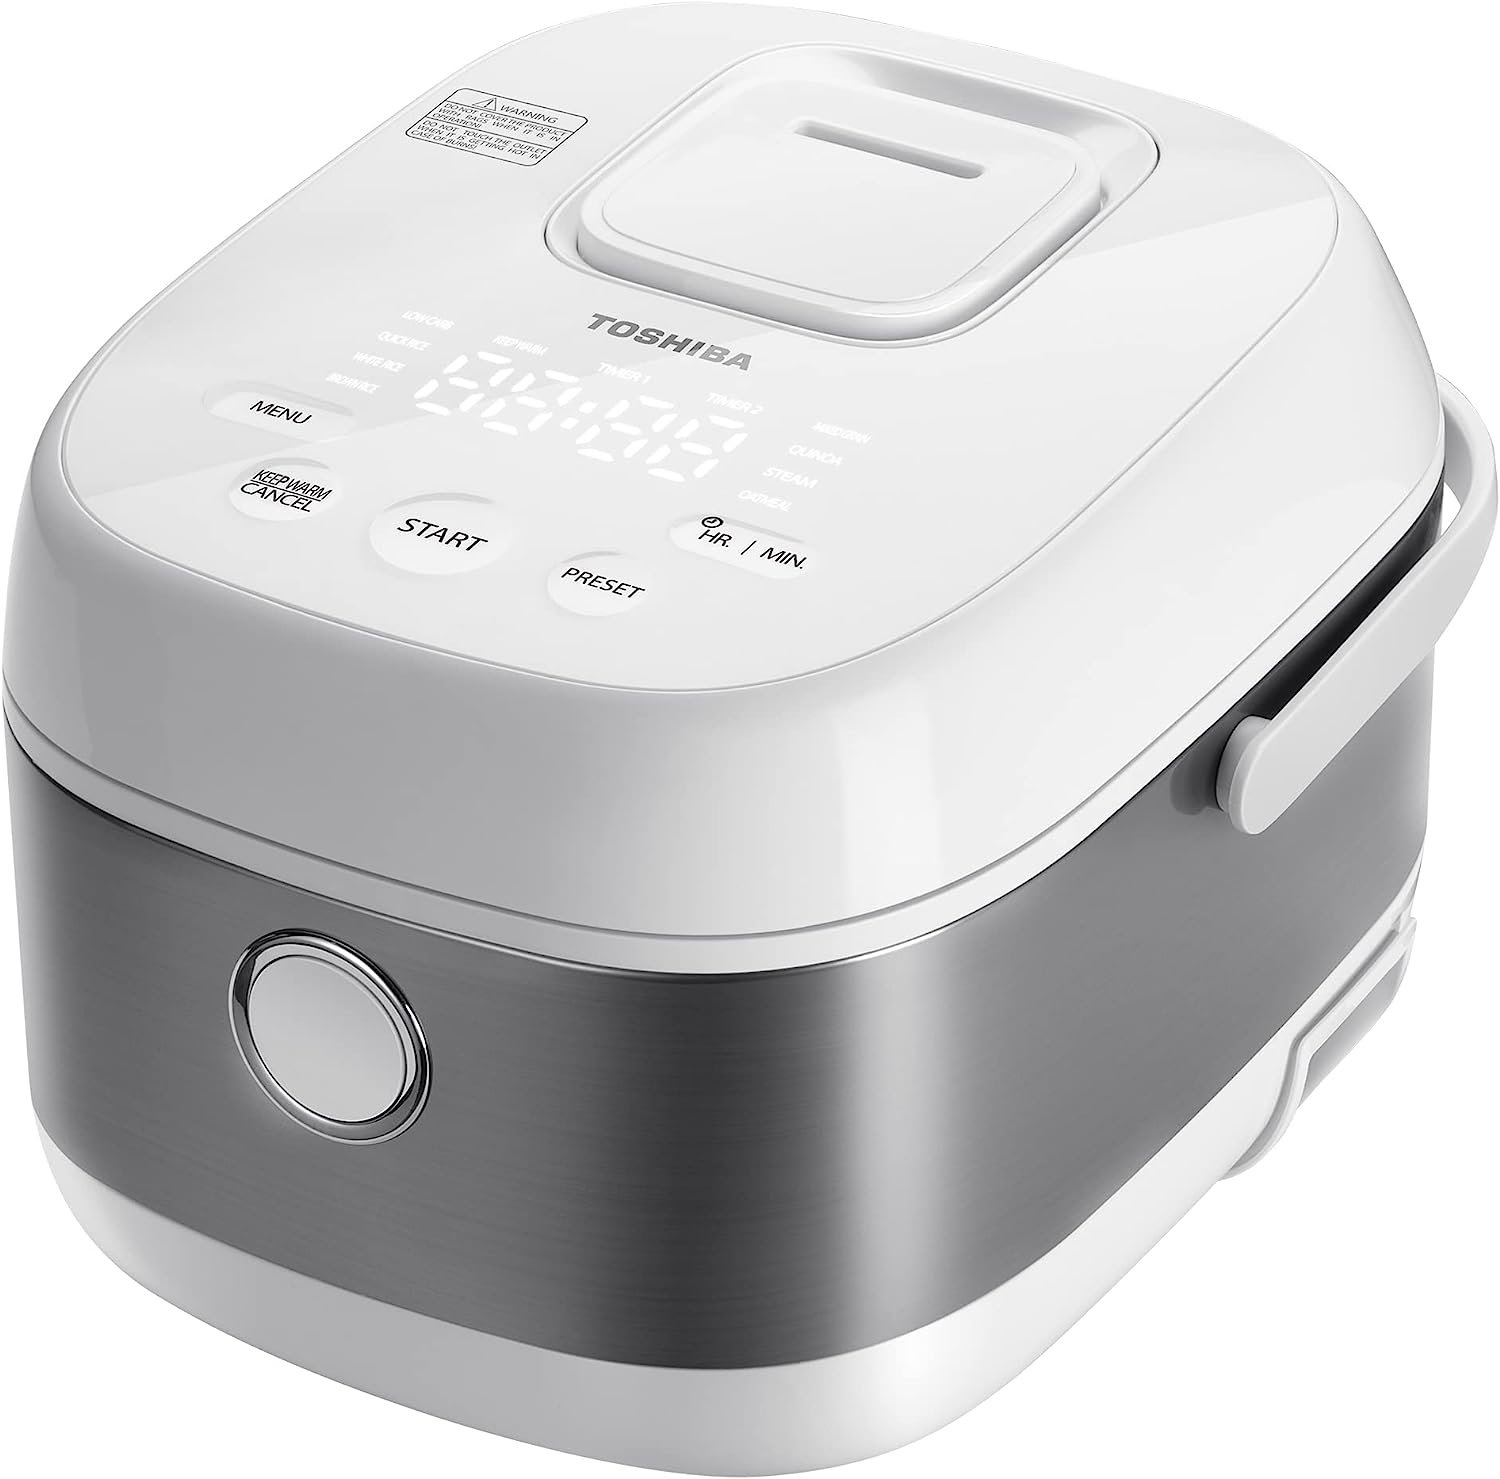 Toshiba Induction Low Carb Rice Cooker